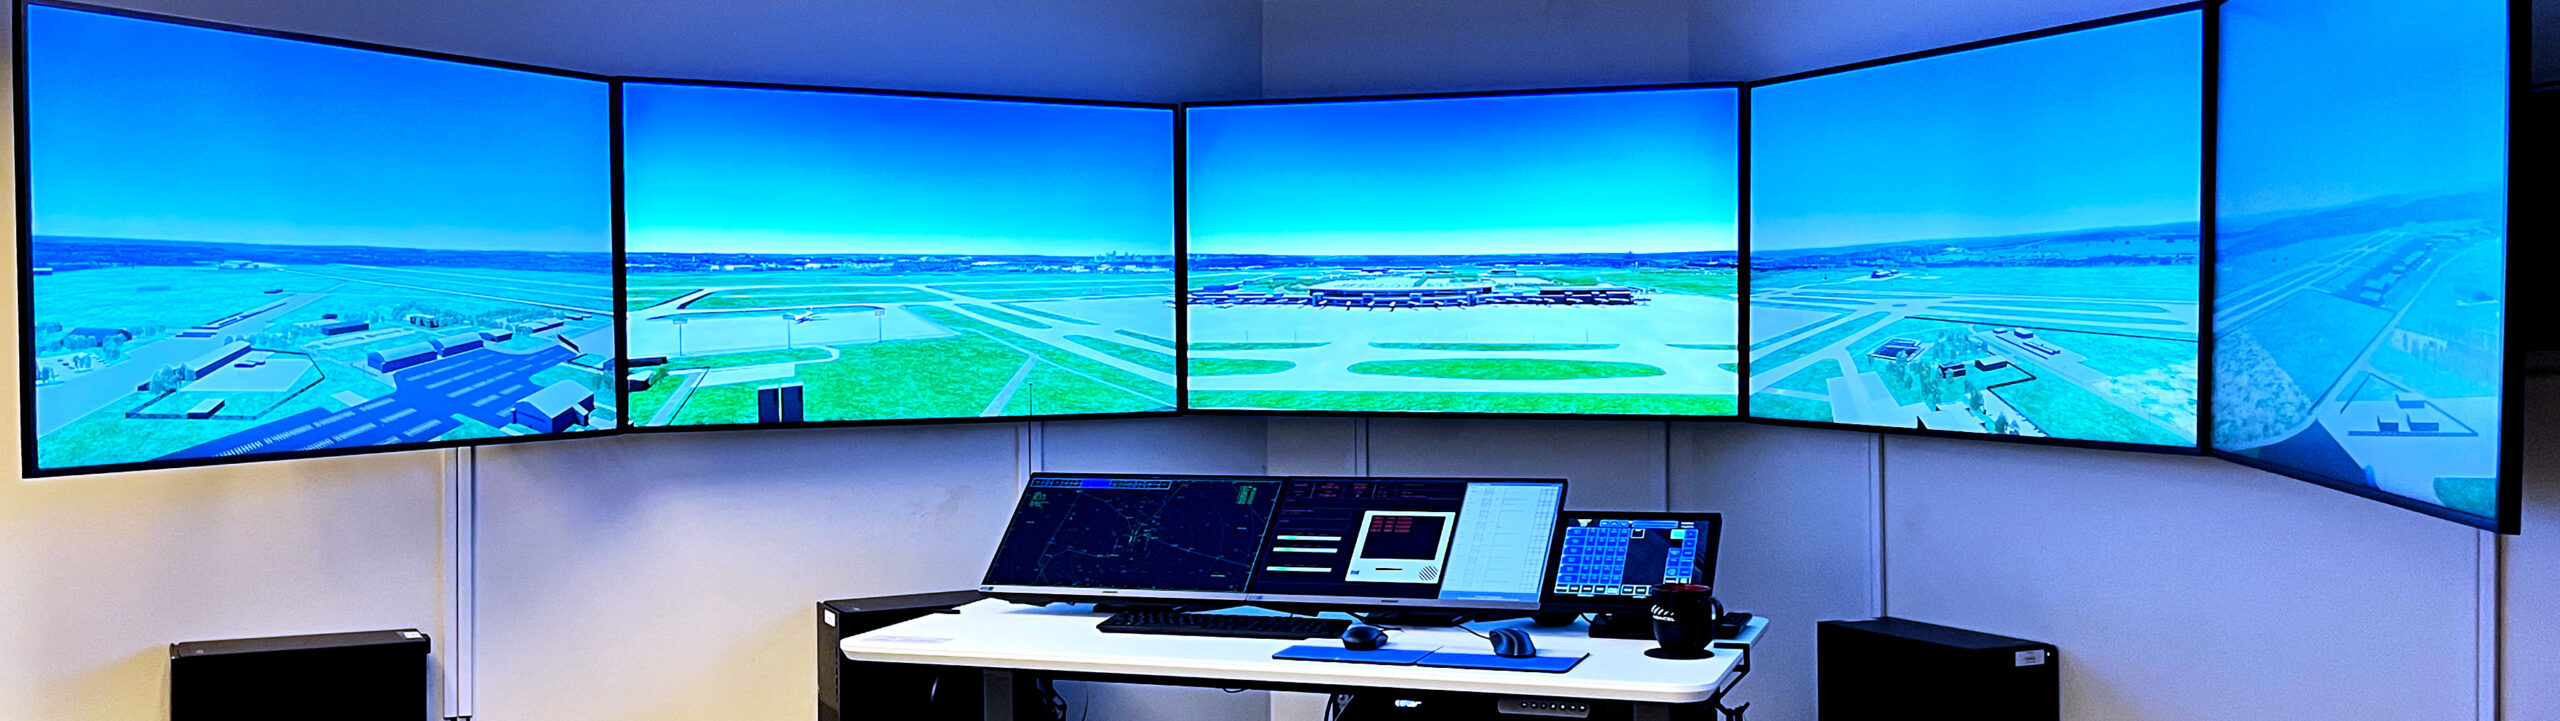 Austin Airport is first in nation to get advanced tower simulator